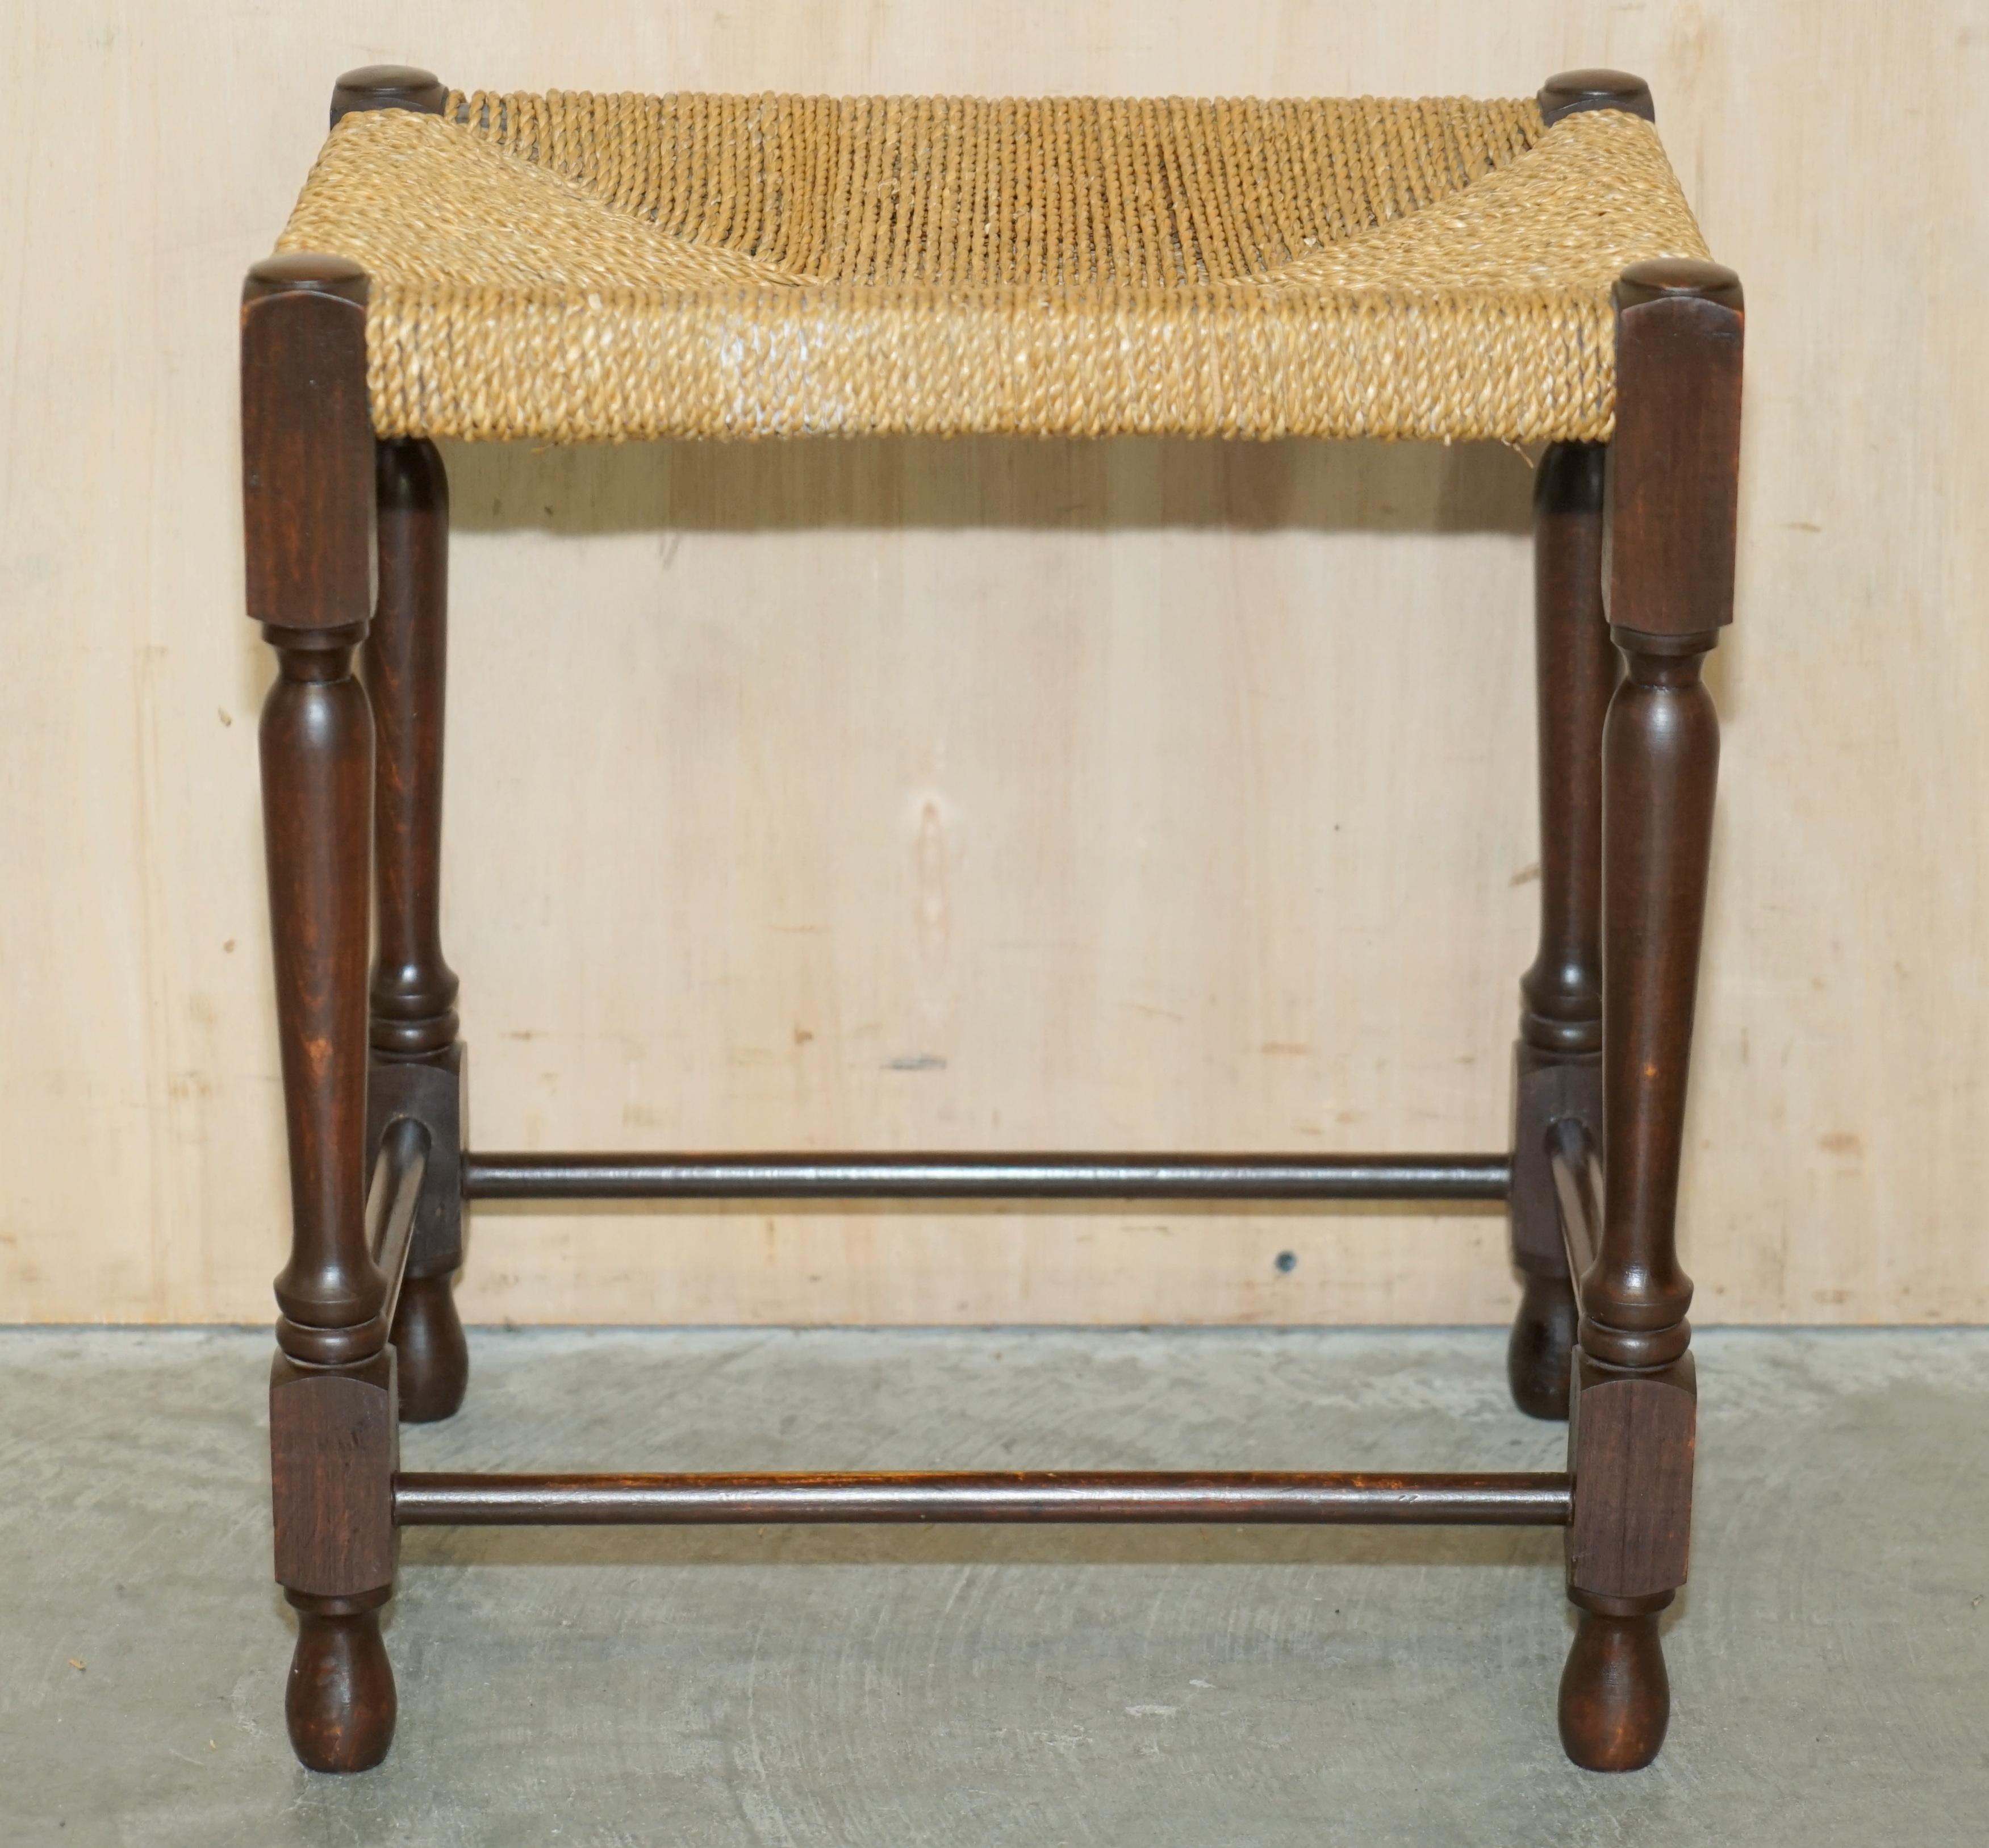 Country Vintage circa 1940s Dutch Bench Stool with Rope Woven Rush Style Seat For Sale